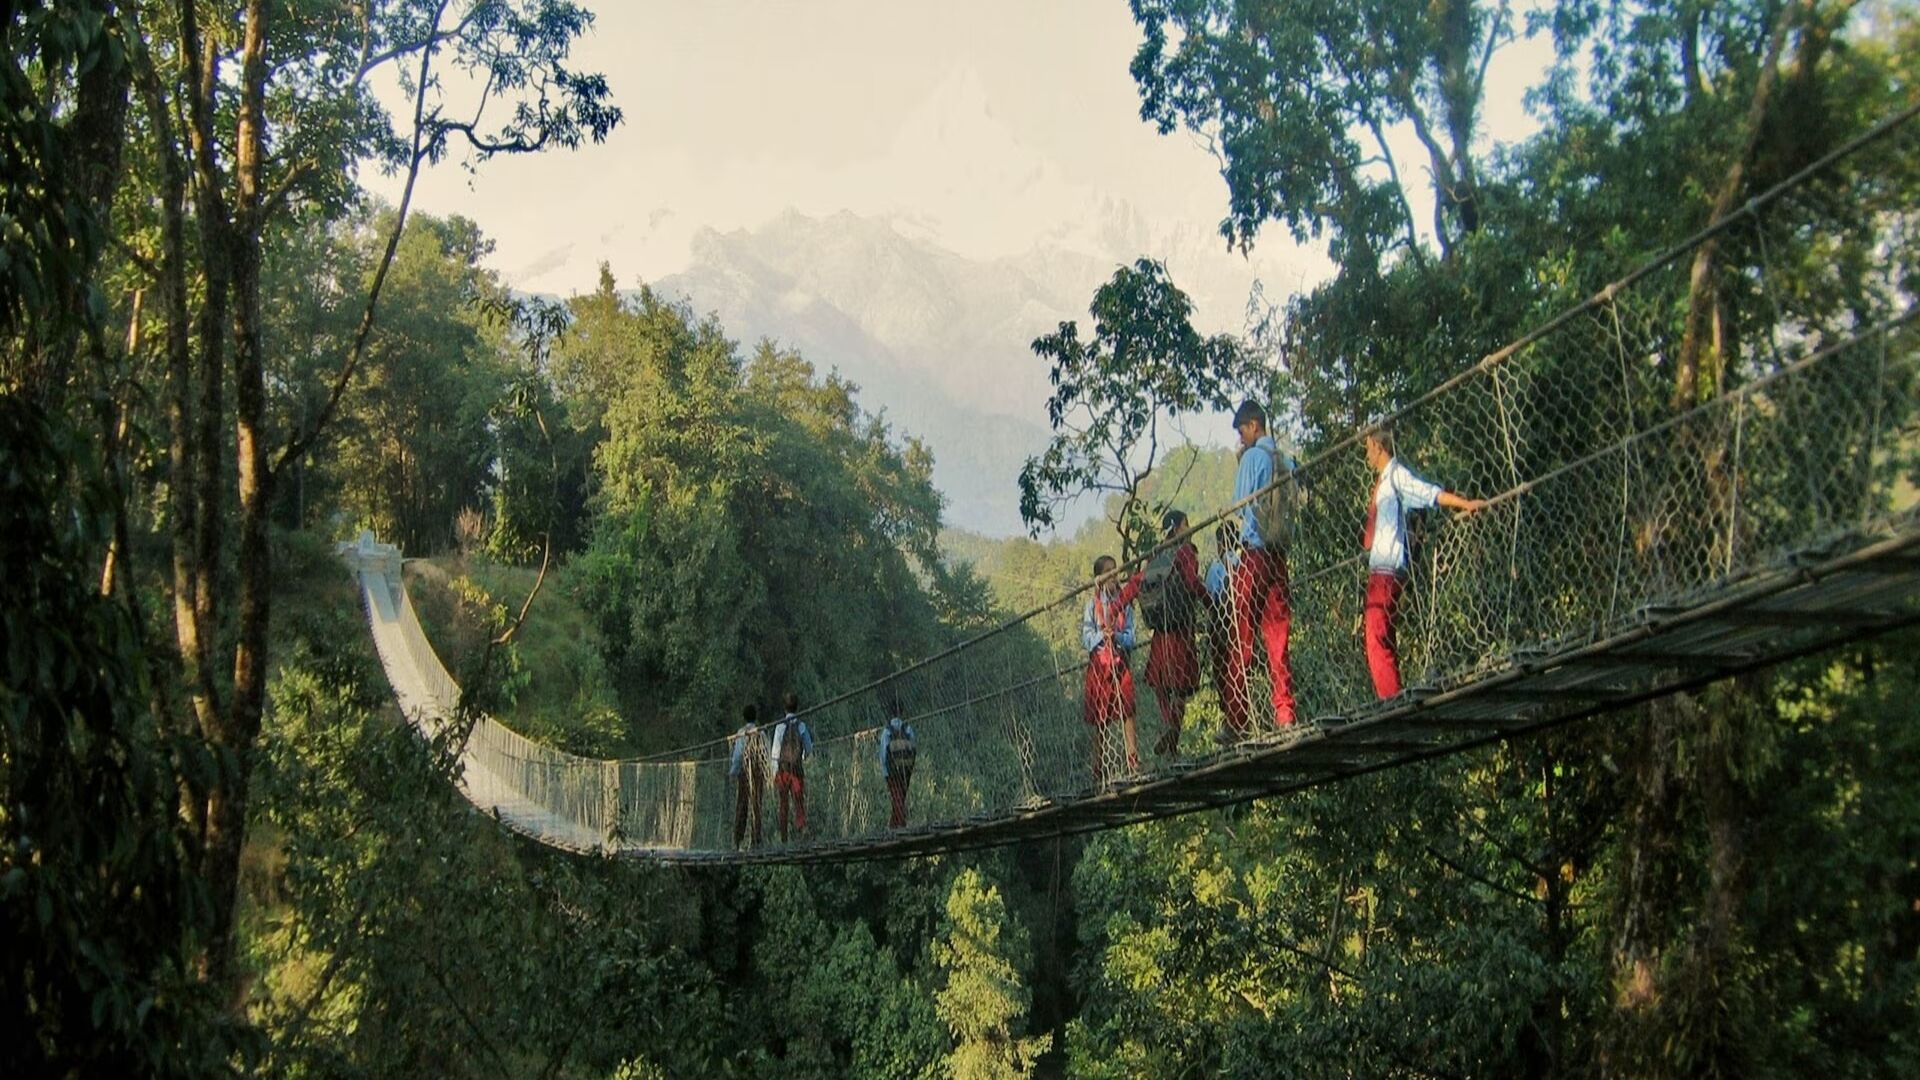 Suspension bridges: in 63 years designed and built in Nepal 10 thousand suspended passages thanks to the collaboration of Switzerland